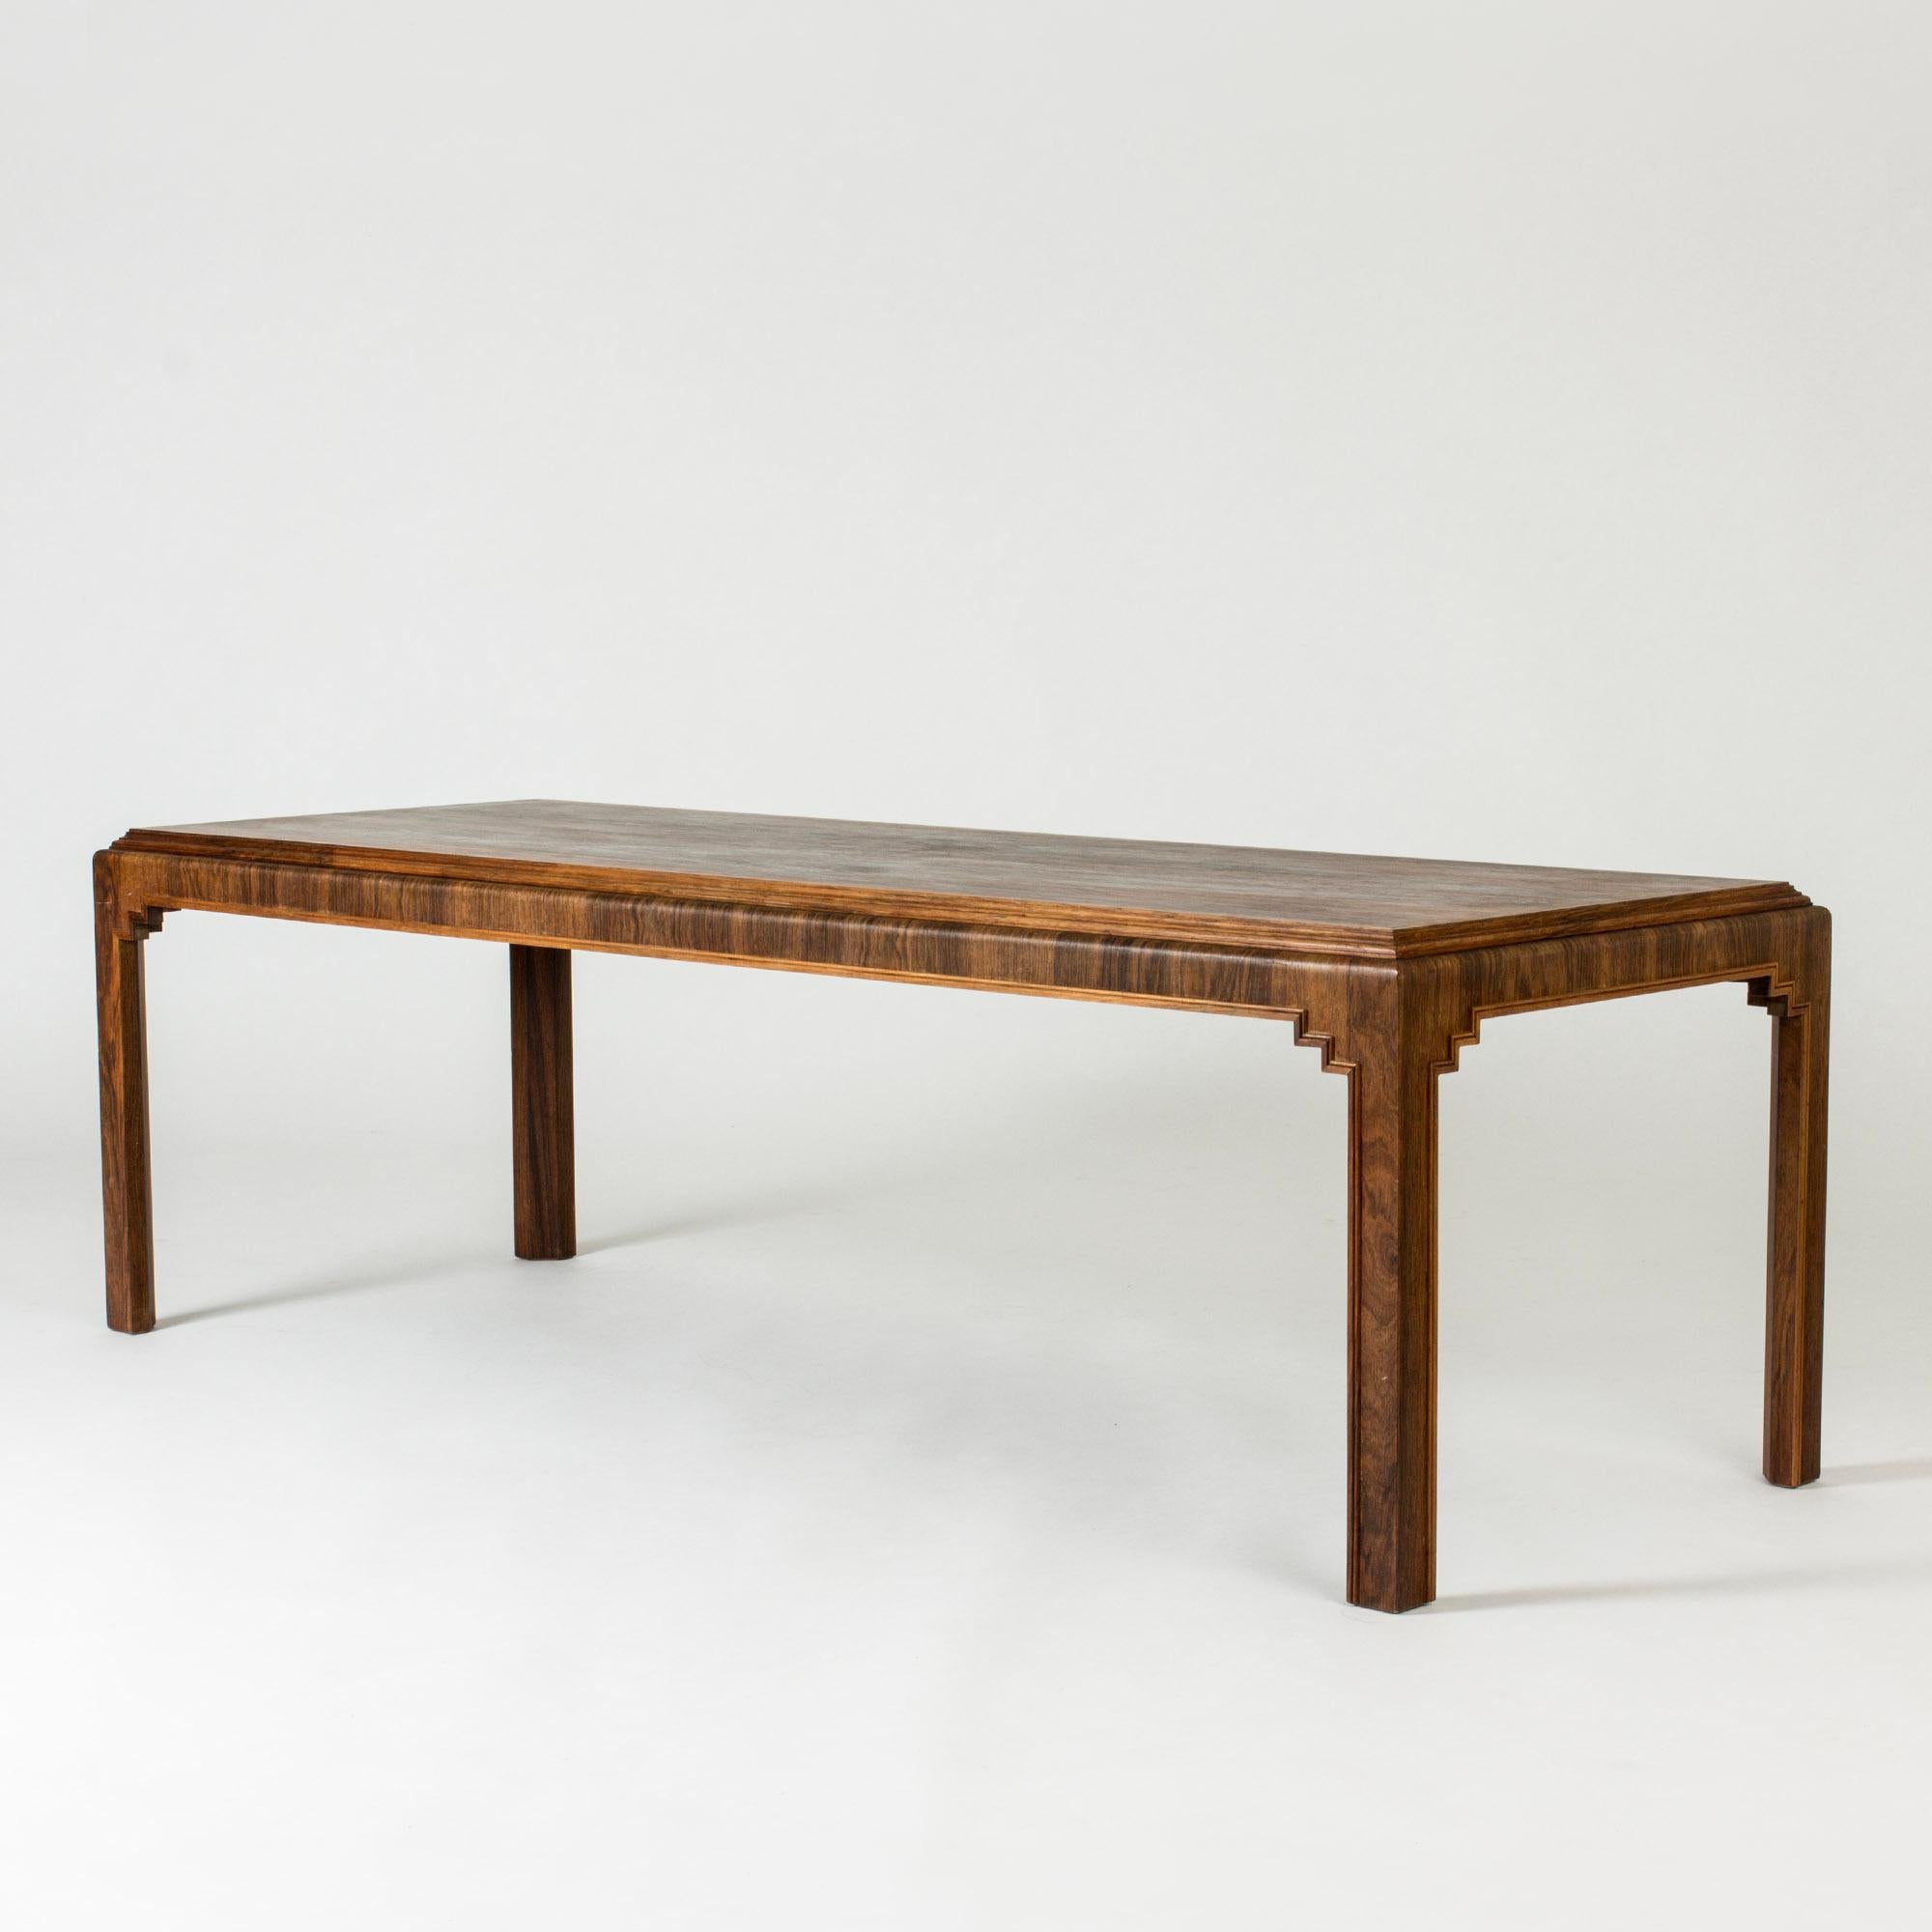 Elegant rosewood coffee table, made in Sweden in the 1930s. Rosewood veneer laid in contrasting directions on the table top and on the side rim. Striking graphic ornaments in the joinery between legs and table top.